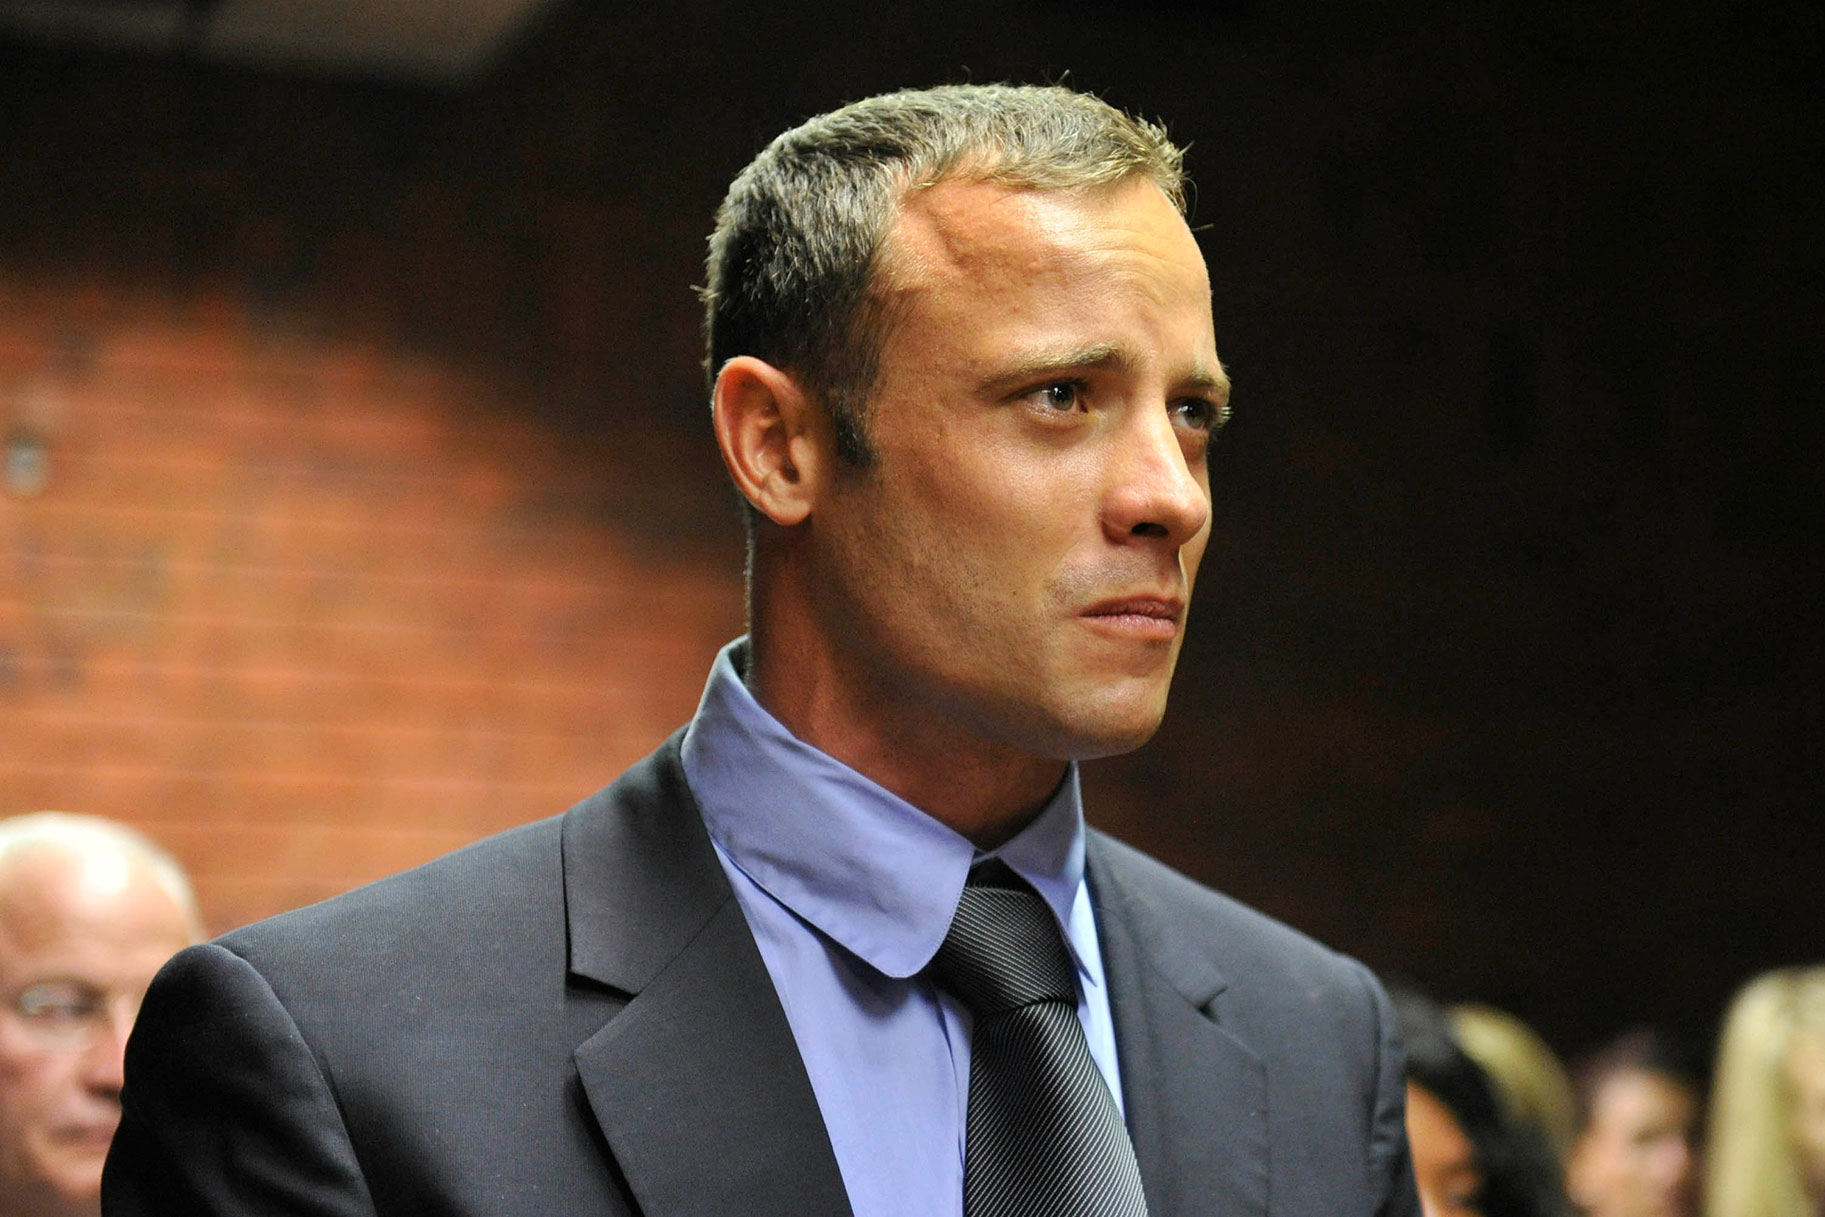 Oscar Pistorius stands during his bail application in 2013